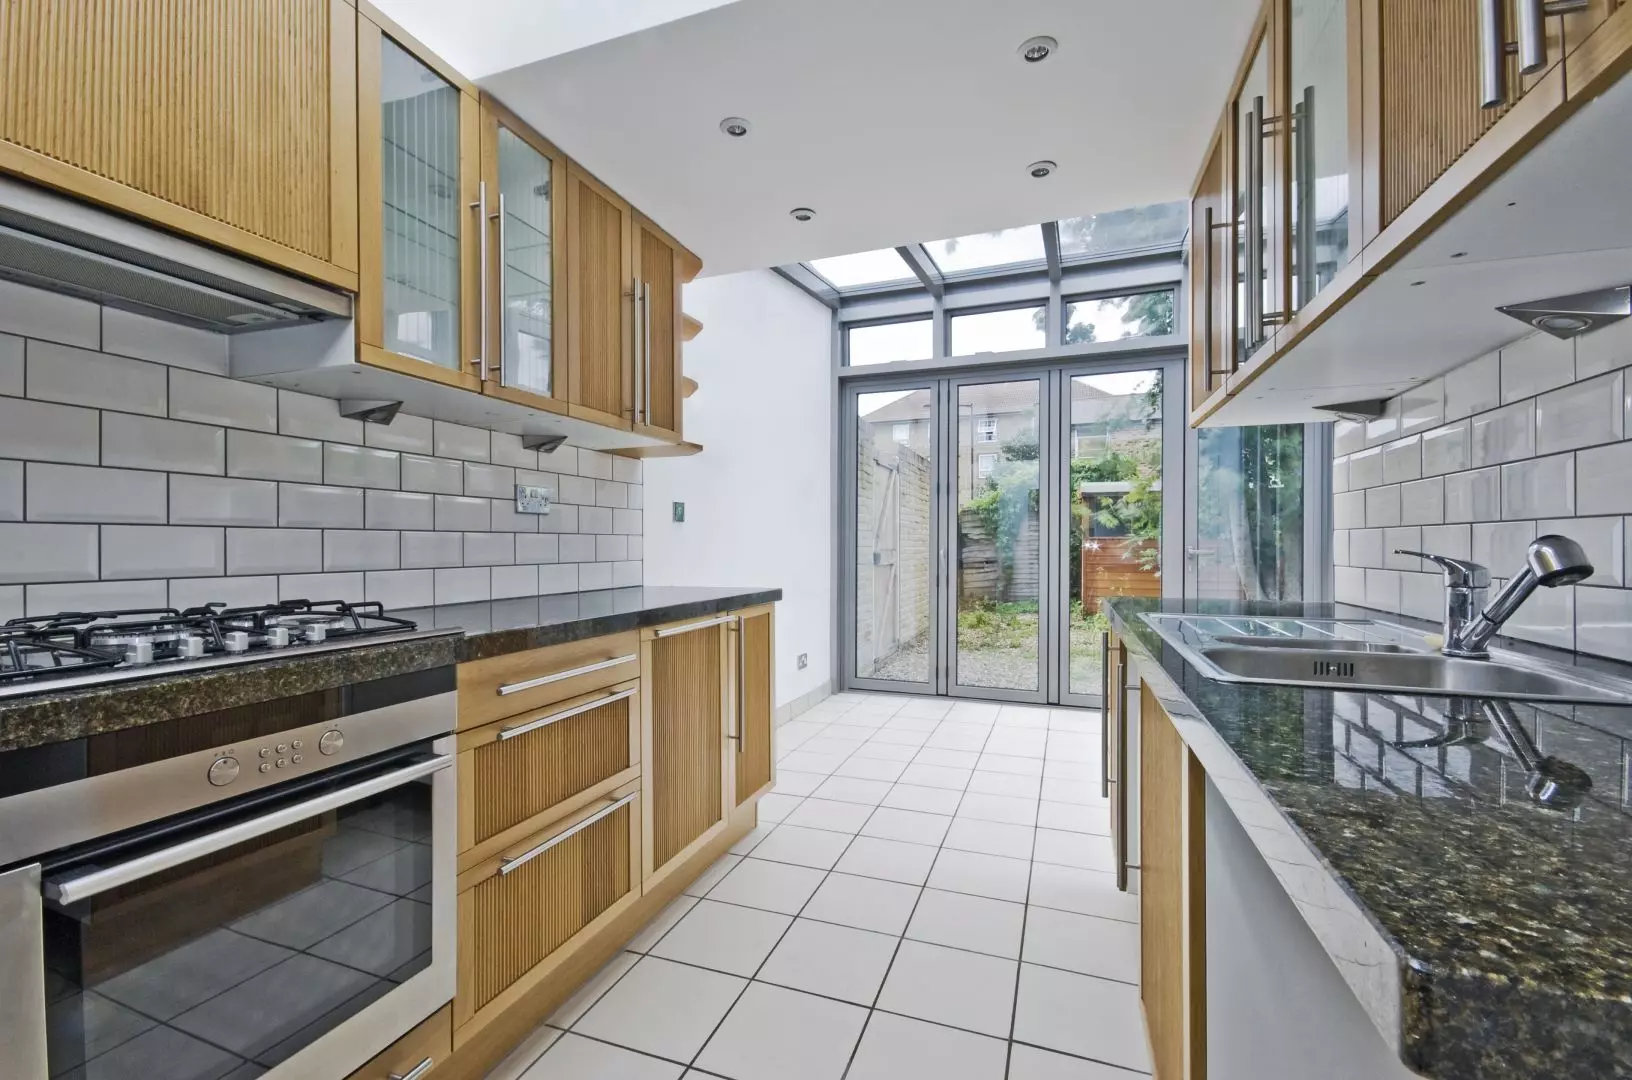 HOW MUCH DOES A PROFESSIONAL KITCHEN DESIGNER COST IN THE UK?